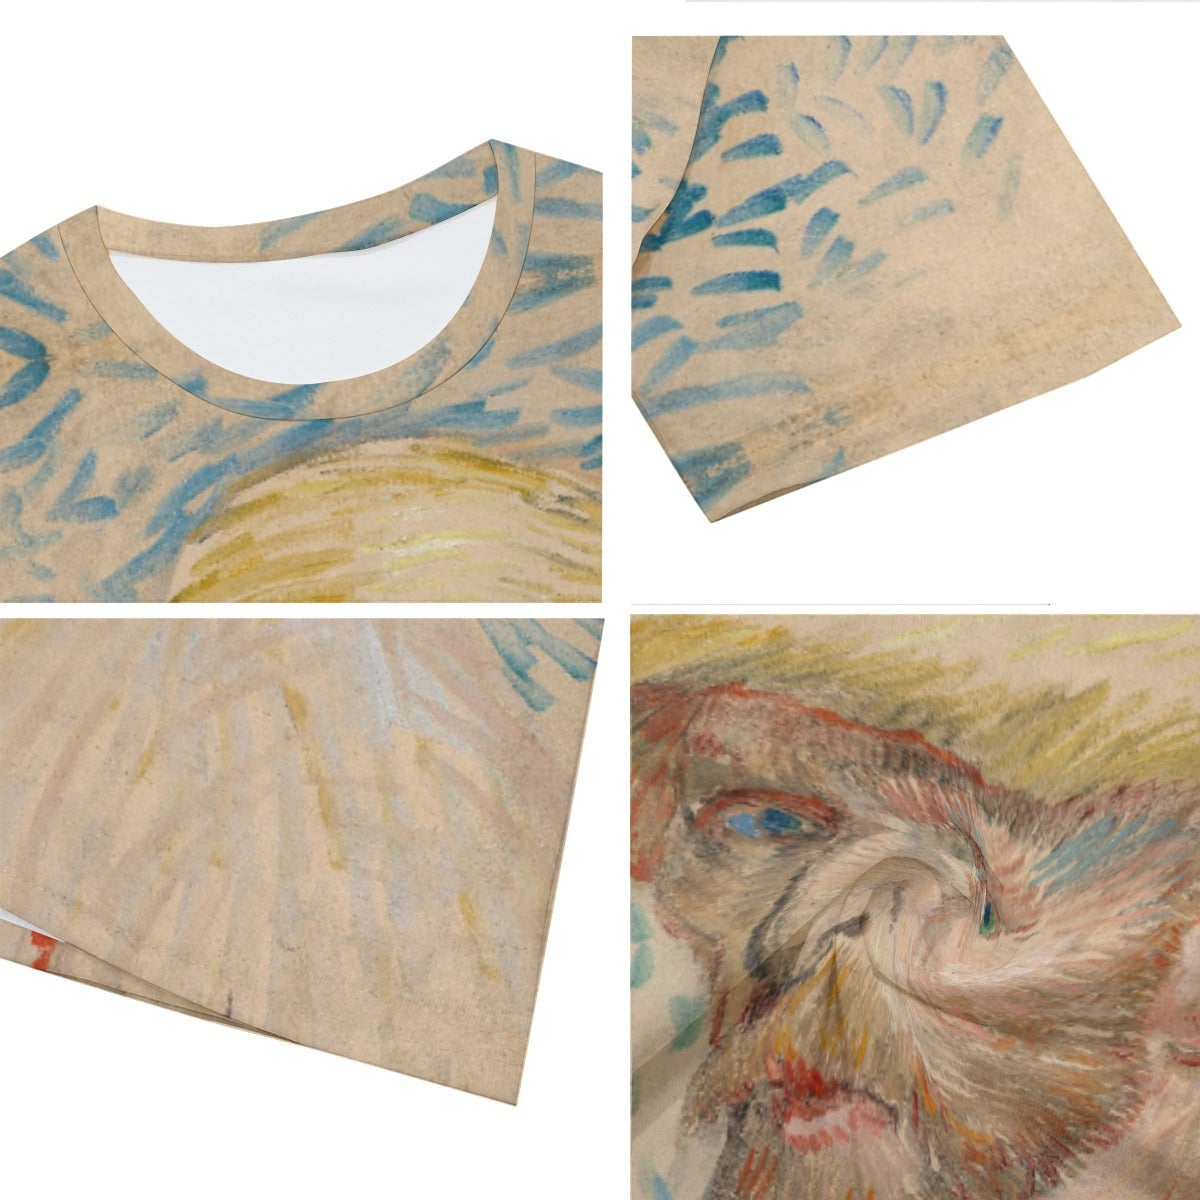 Self-Portrait with a Straw Hat by Vincent van Gogh T-Shirt